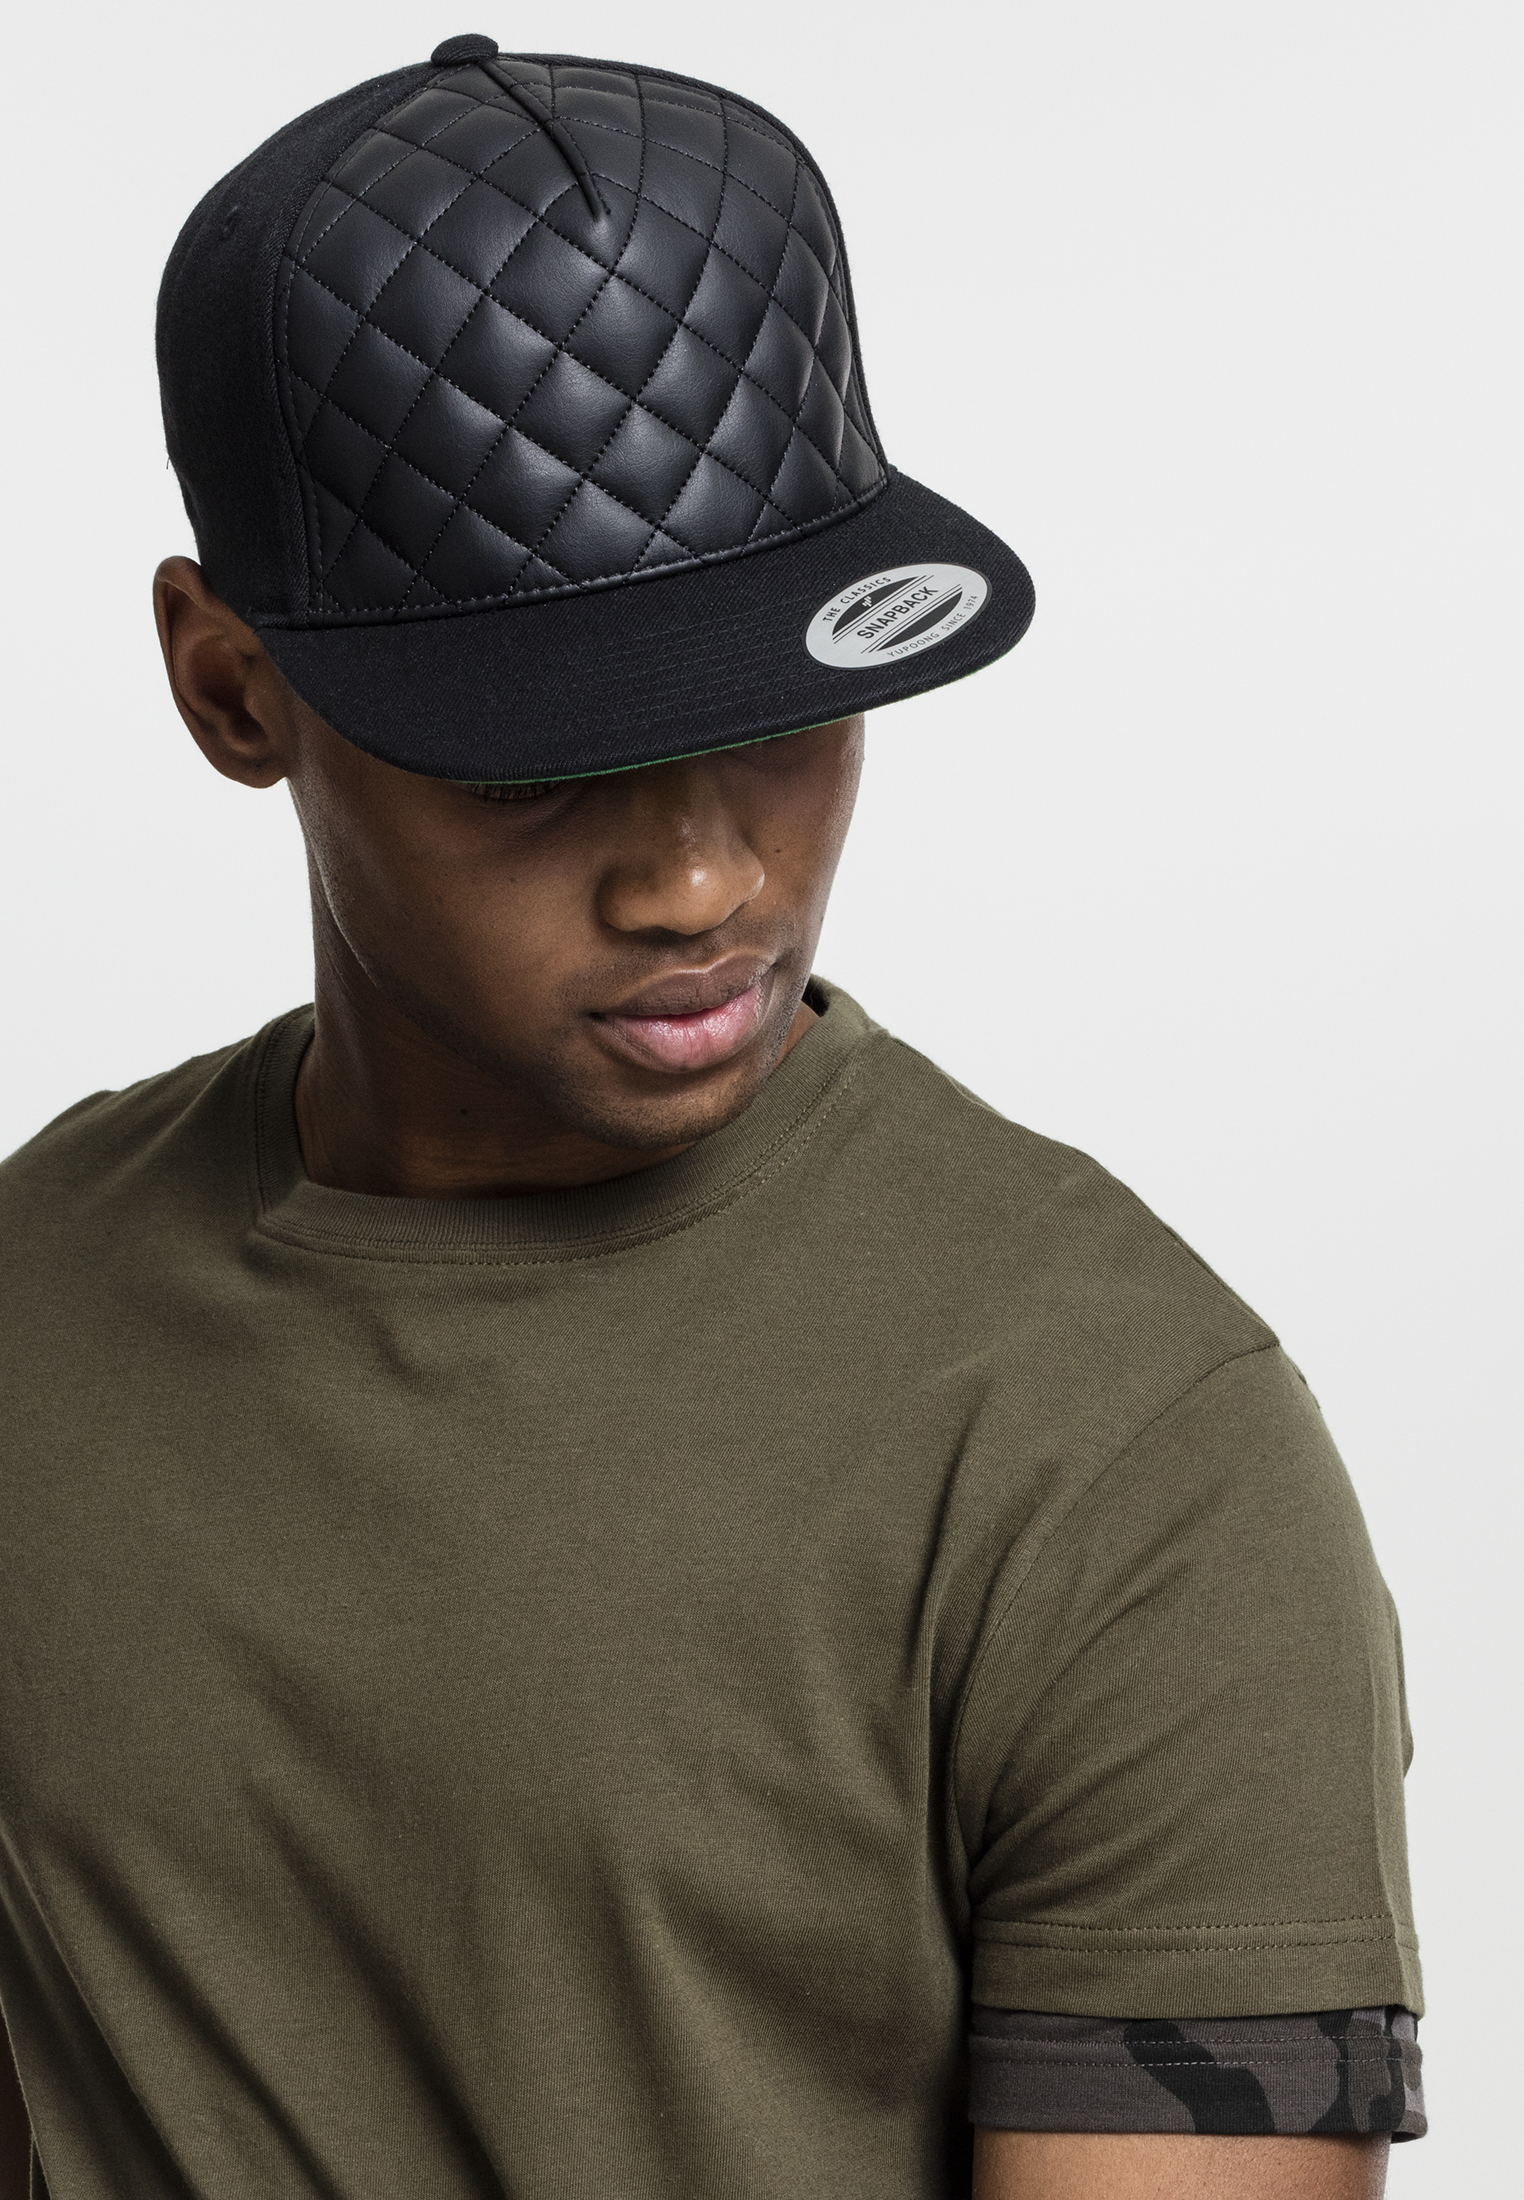 Snapback Diamond Quilted Snapback in Farbe black